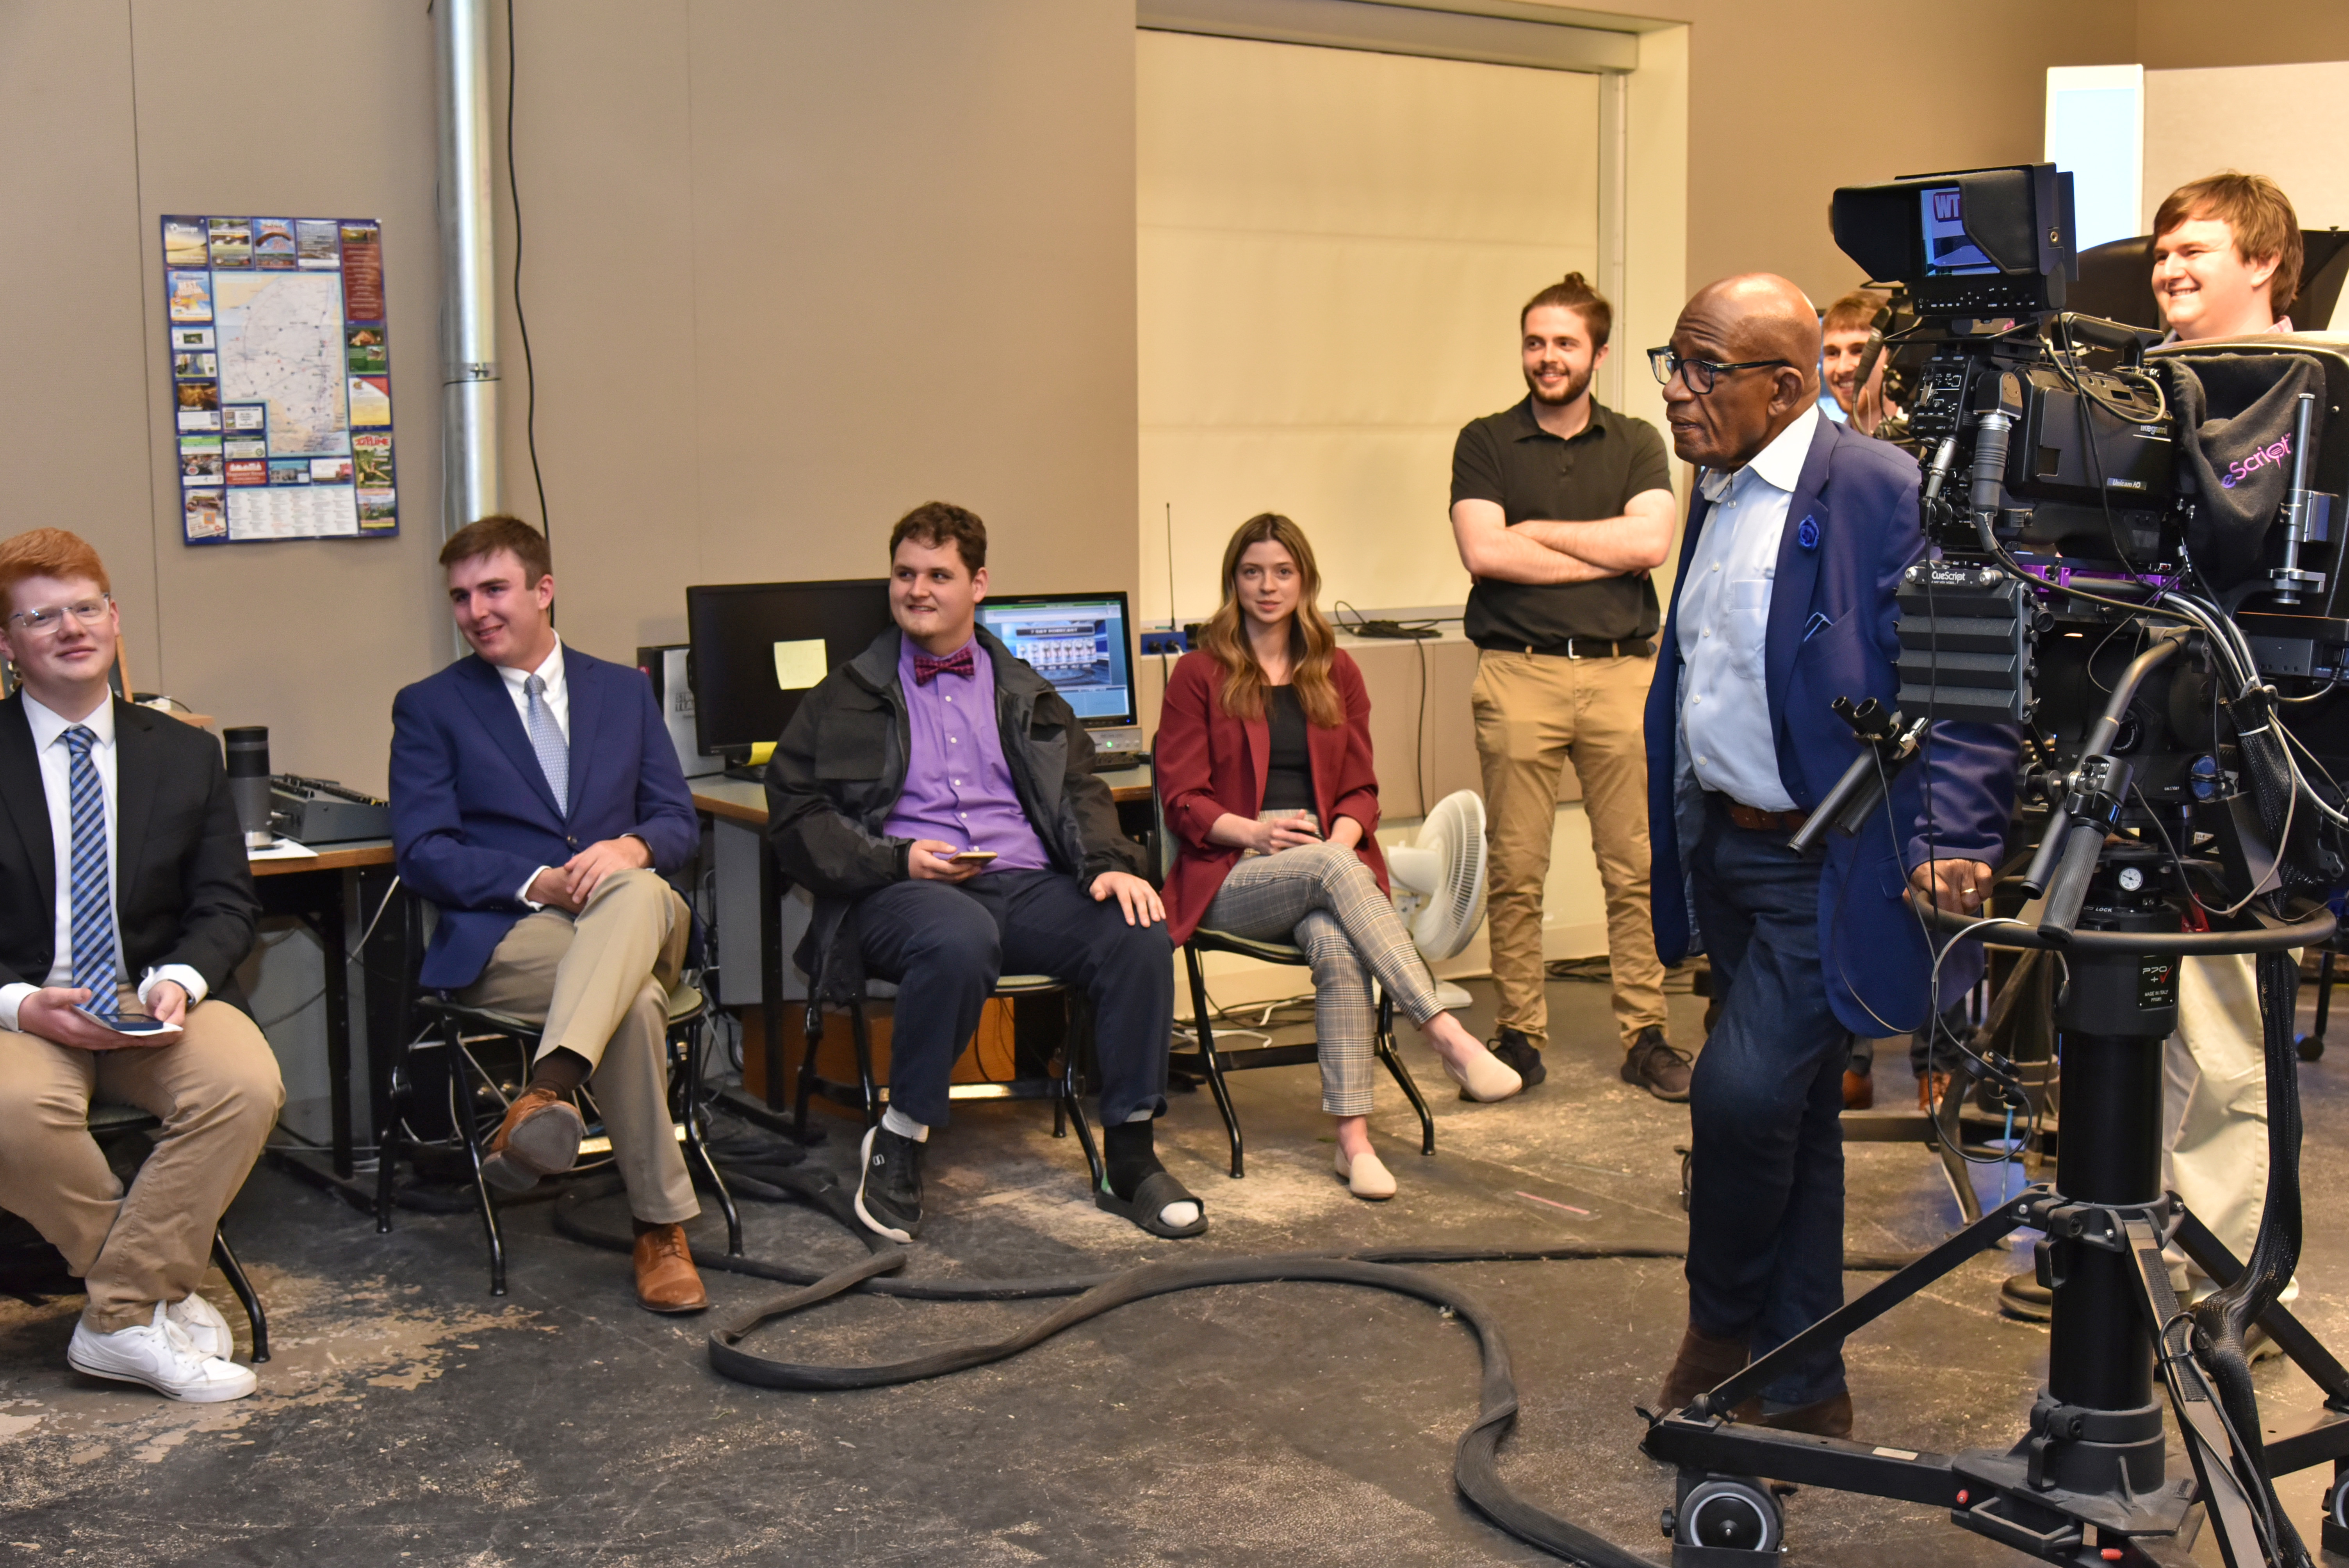 Popular NBC Today show co-host and weatherman – and 1976 SUNY Oswego graduate – Al Roker had a chance to meet students face-to-face in his “Building an On-Air Career” course he has been virtually co-teaching with Michael Riecke in an April 27 campus visit.